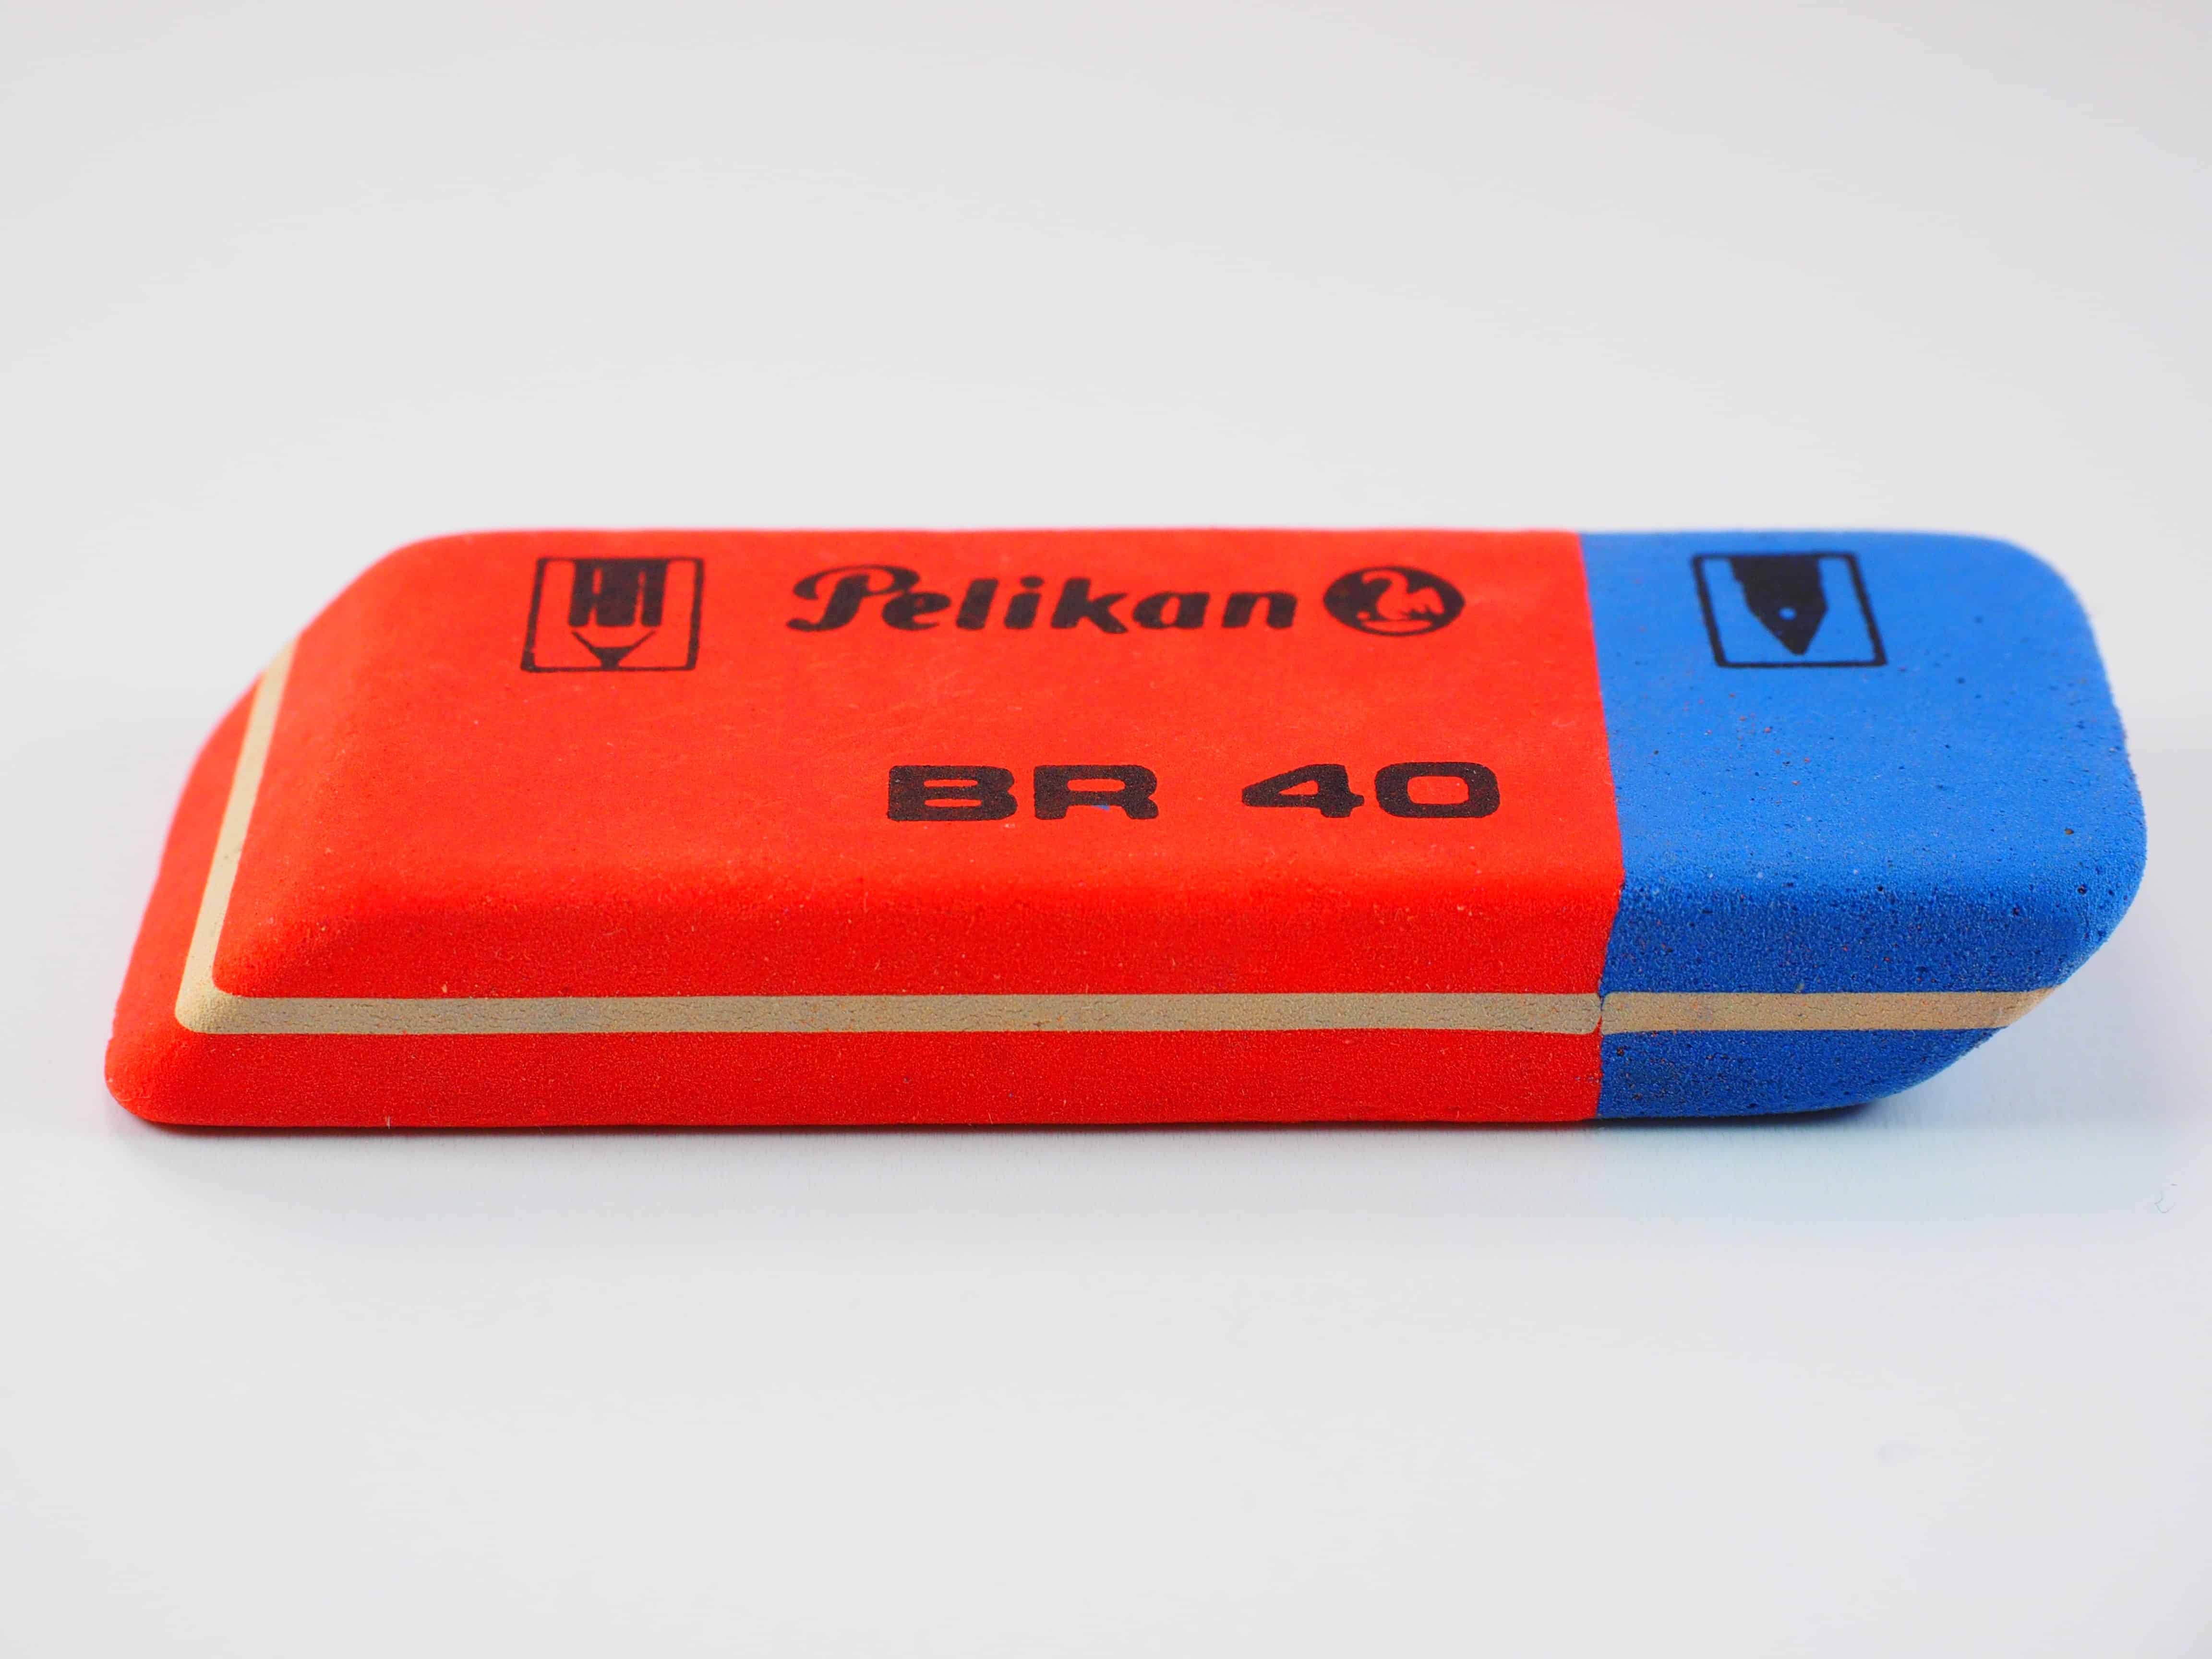 Red and Blue Pelikan BR 40 Eraser on White Surface by Pixabay via Pixabay.